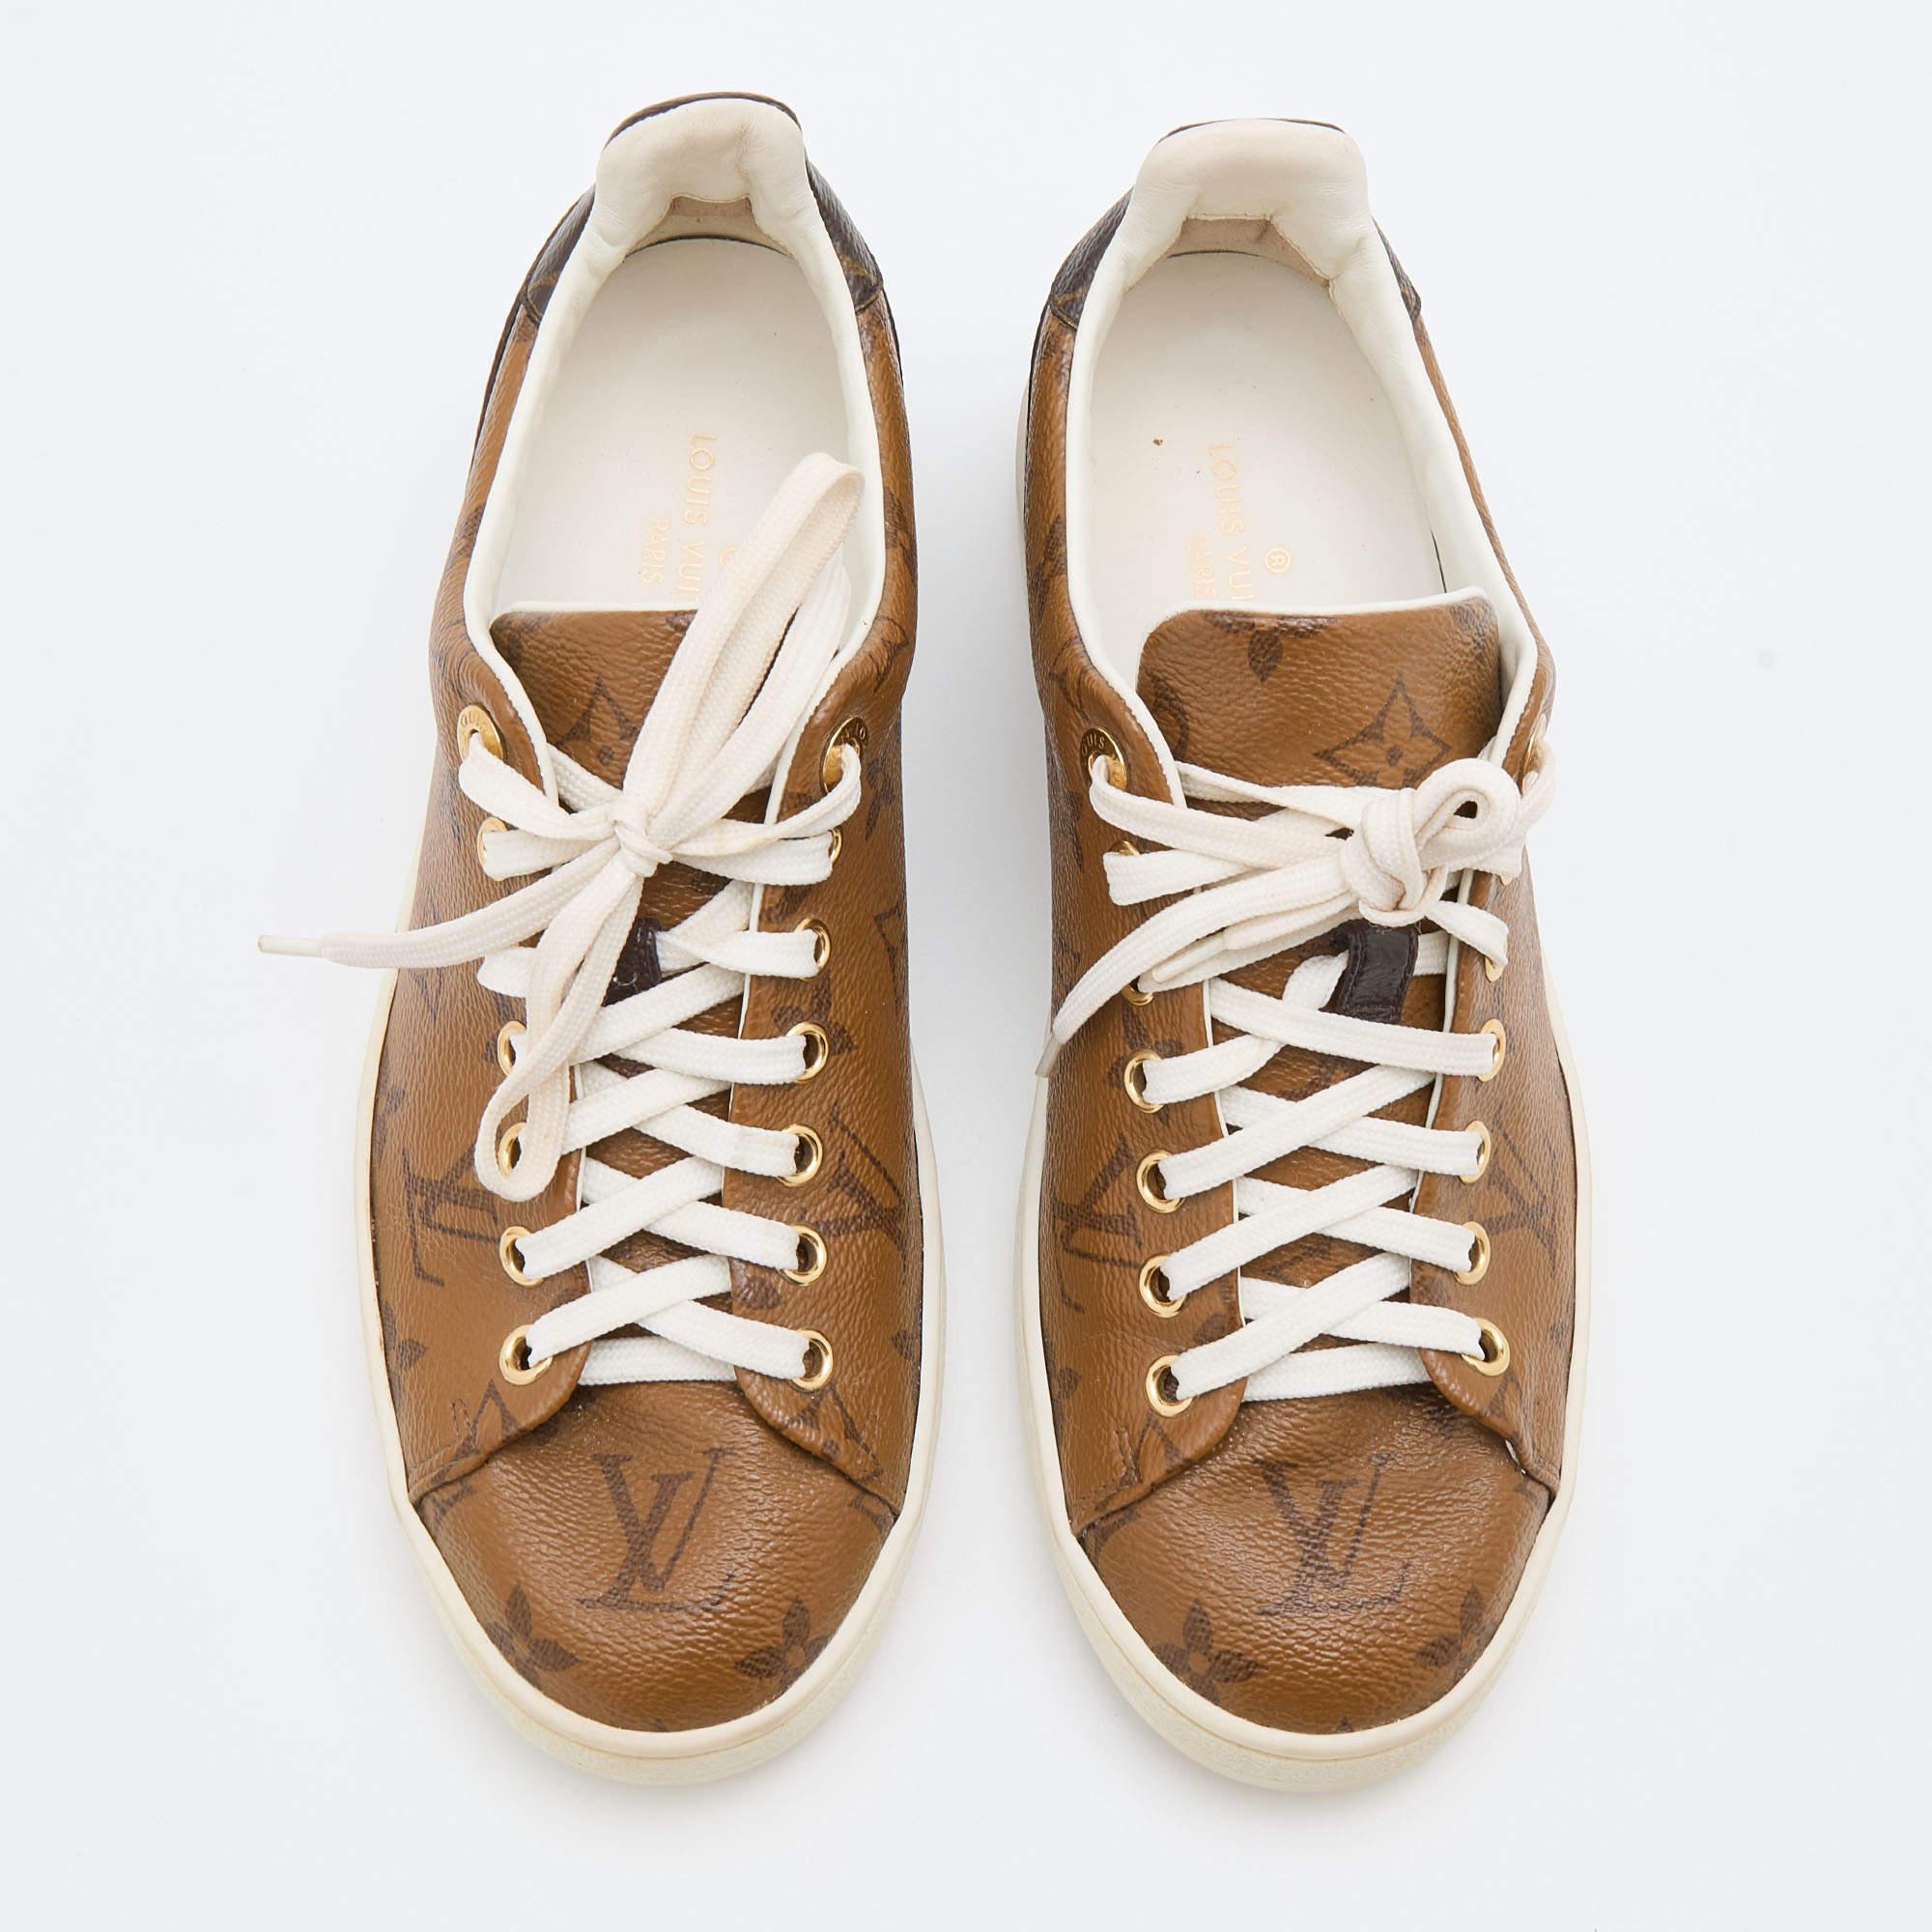 A pair of sneakers by Louis Vuitton to take you places in style and comfort. The low-top sneakers have been crafted from Monogram Canvas, with laces on the uppers for a secured fit.

Includes: Original Dustbag
